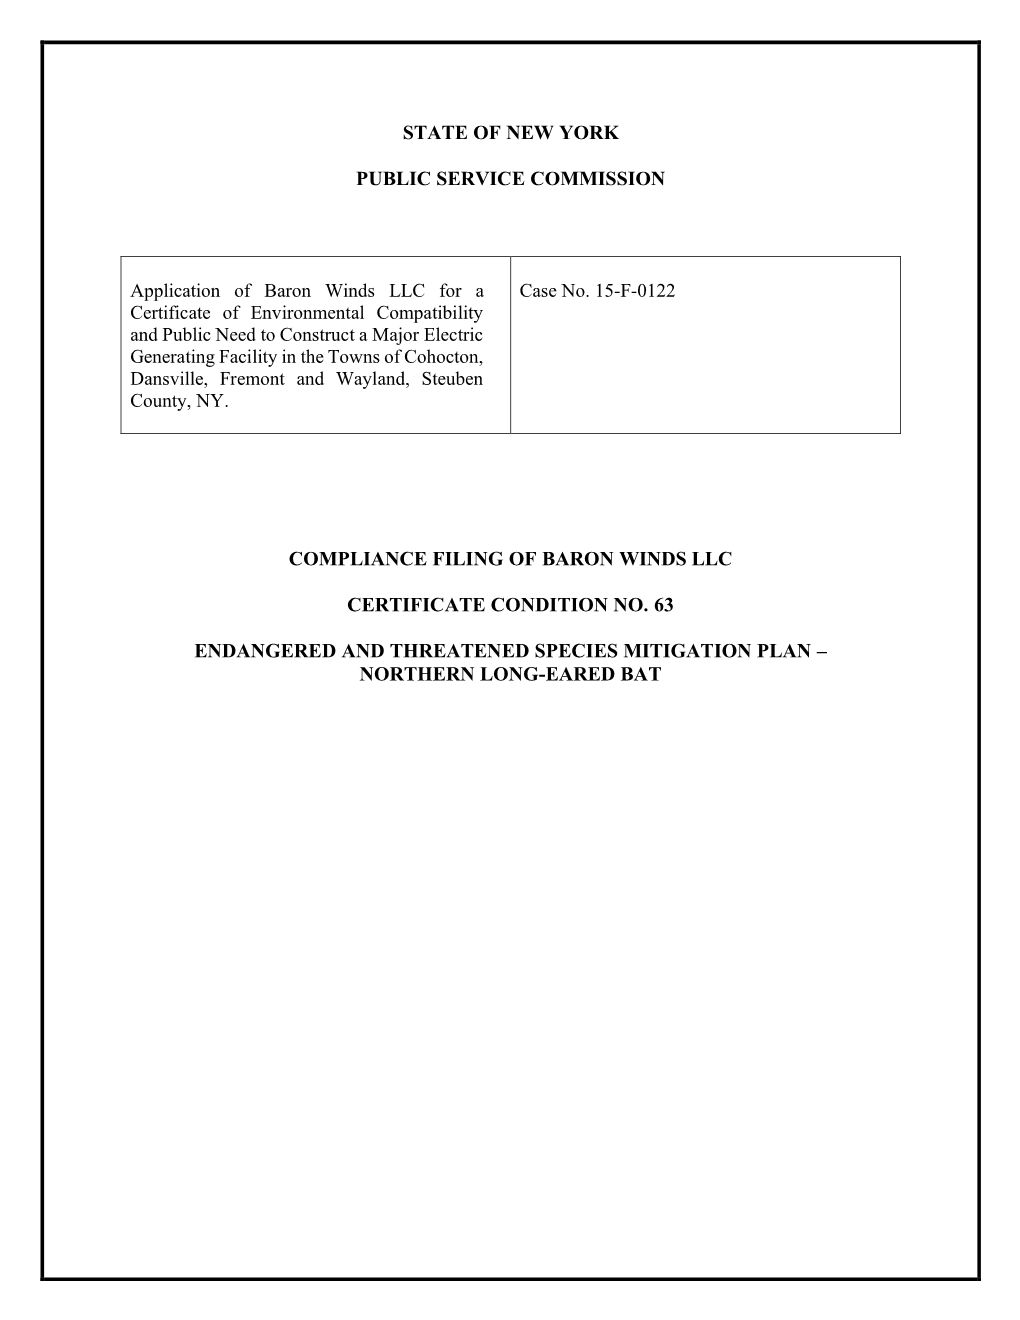 State of New York Public Service Commission Compliance Filing of Baron Winds Llc Certificate Condition No. 63 Endangered and Th